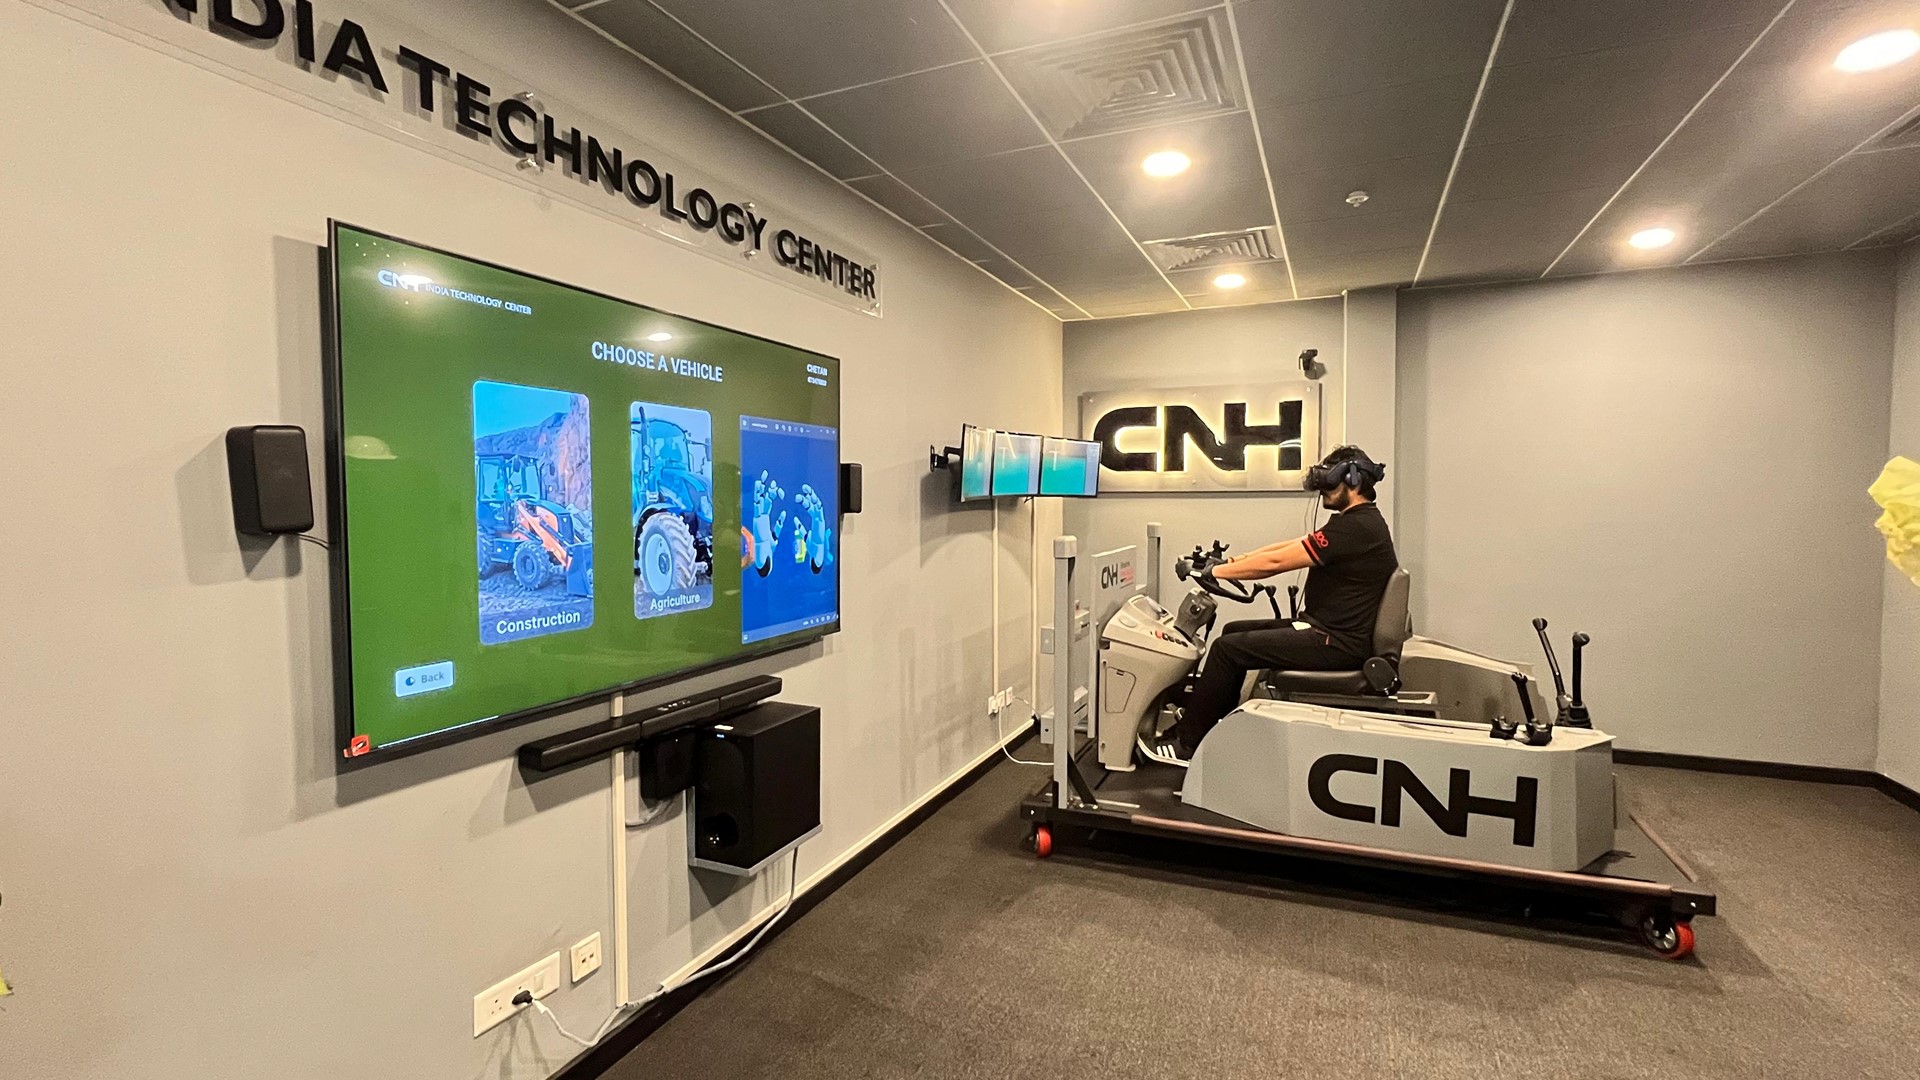 cnh-expands-its-india-technology-center-and-inaugurates-pioneering-multi-vehicle-simulator